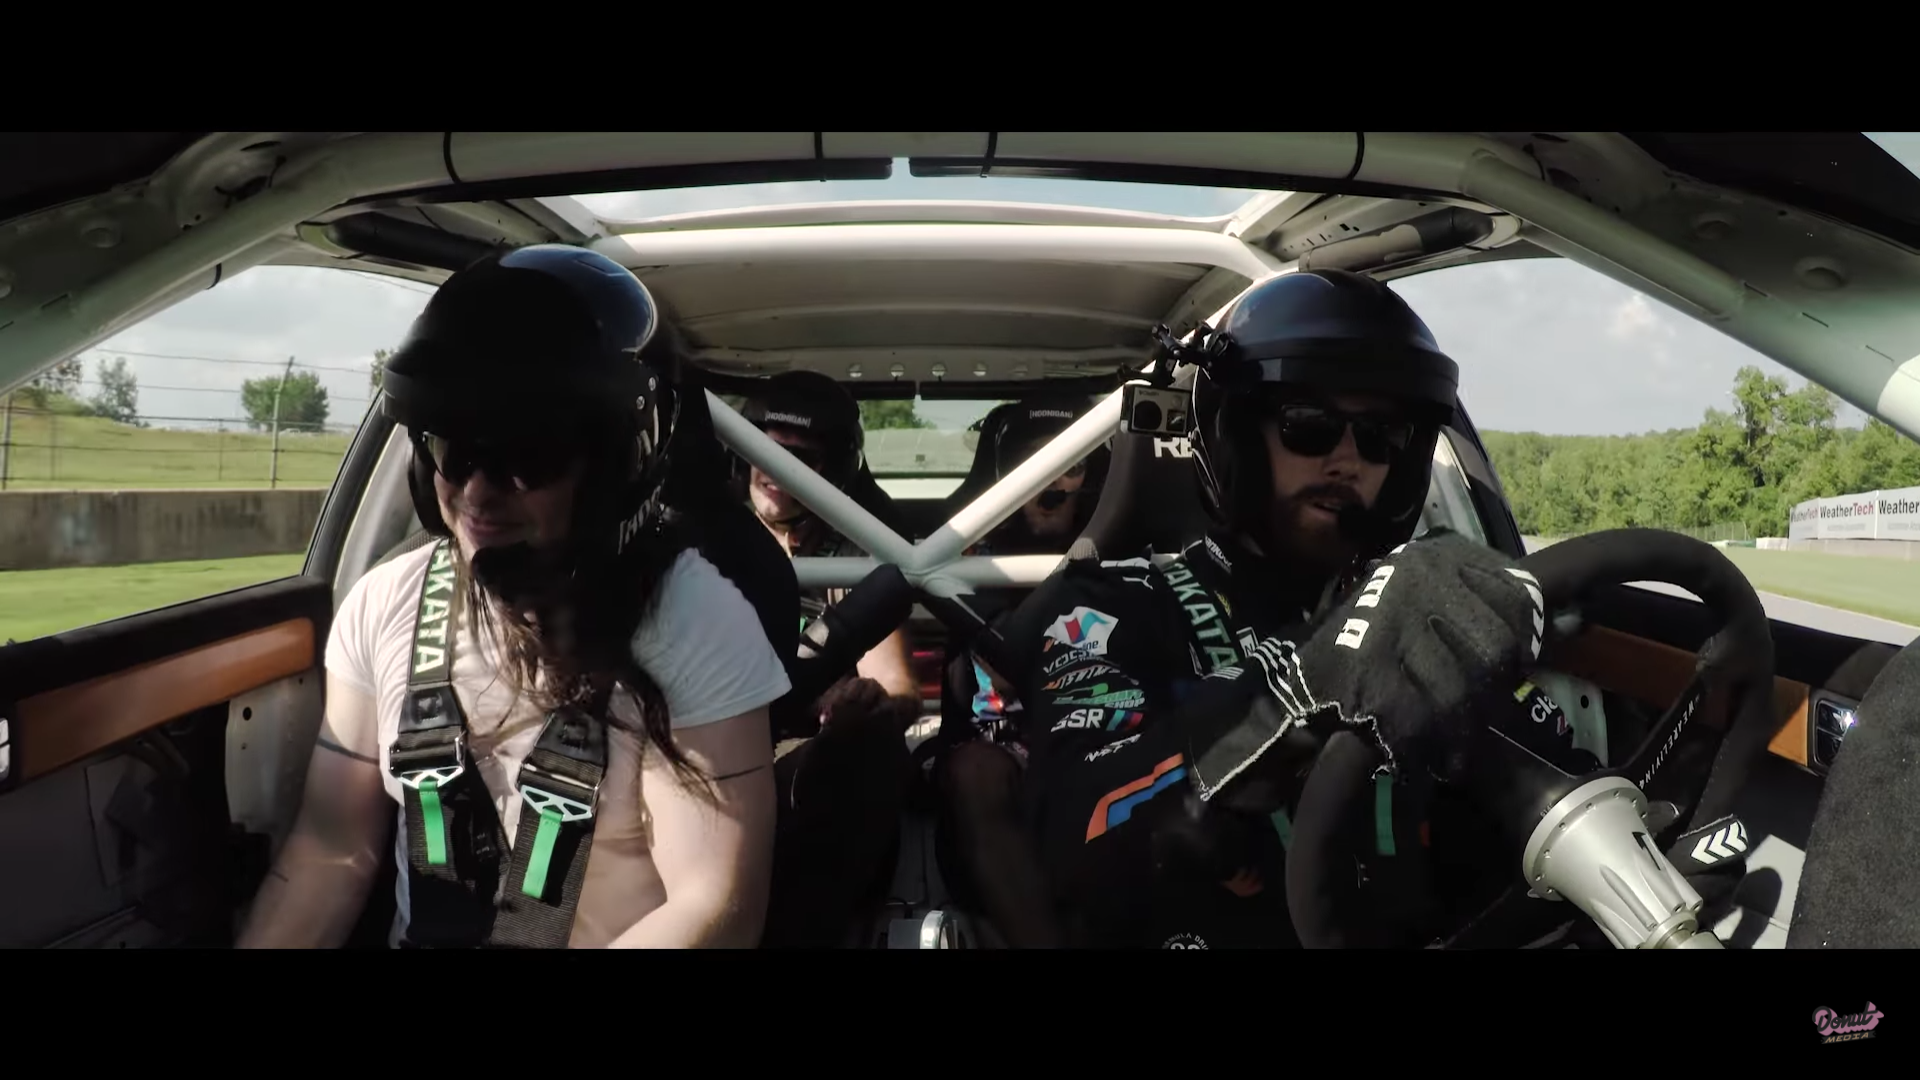 Andrew W.K. Gets His Party on With GridLife Drifting